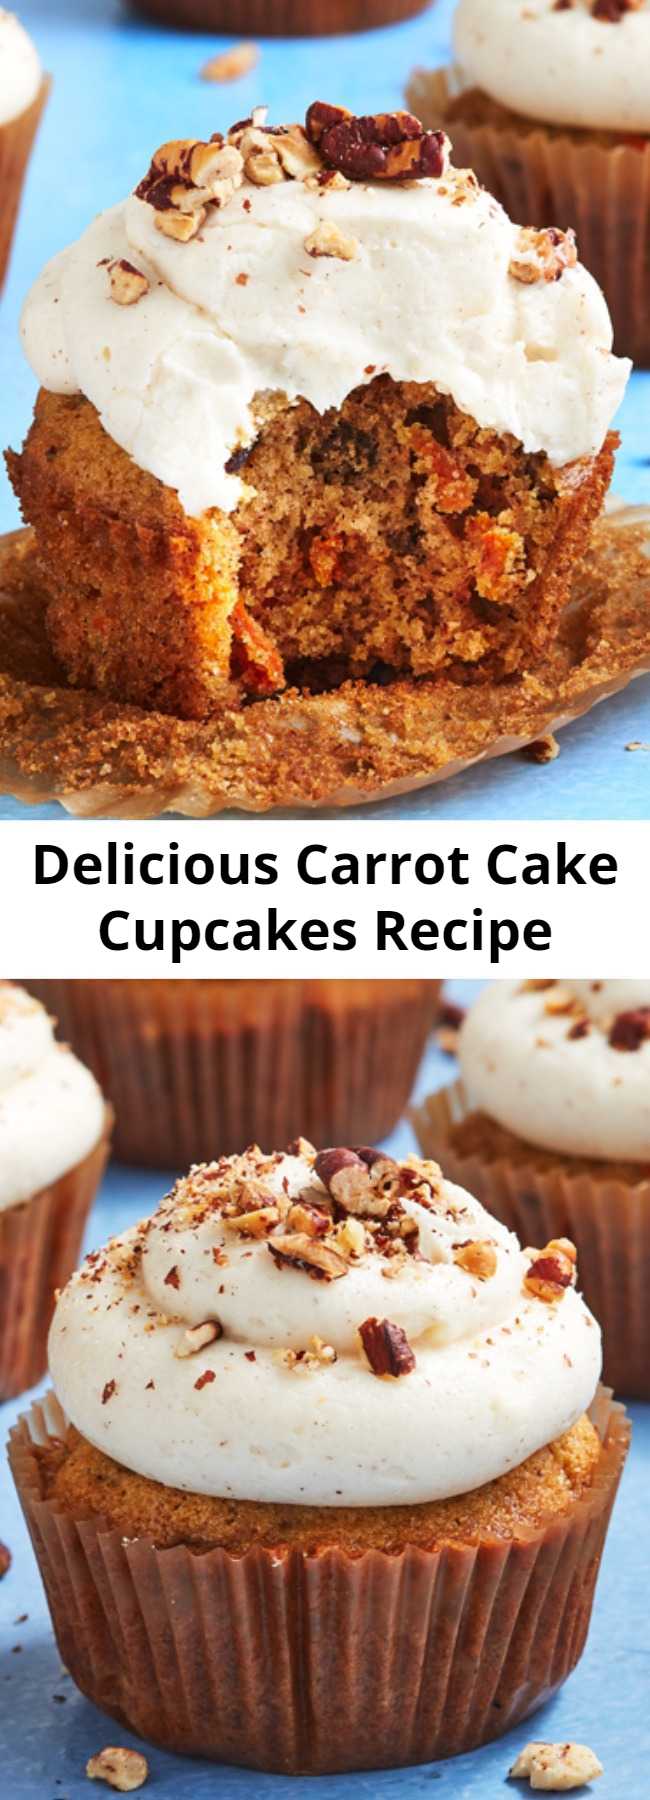 Delicious Carrot Cake Cupcakes Recipe - The perfect spring treat.